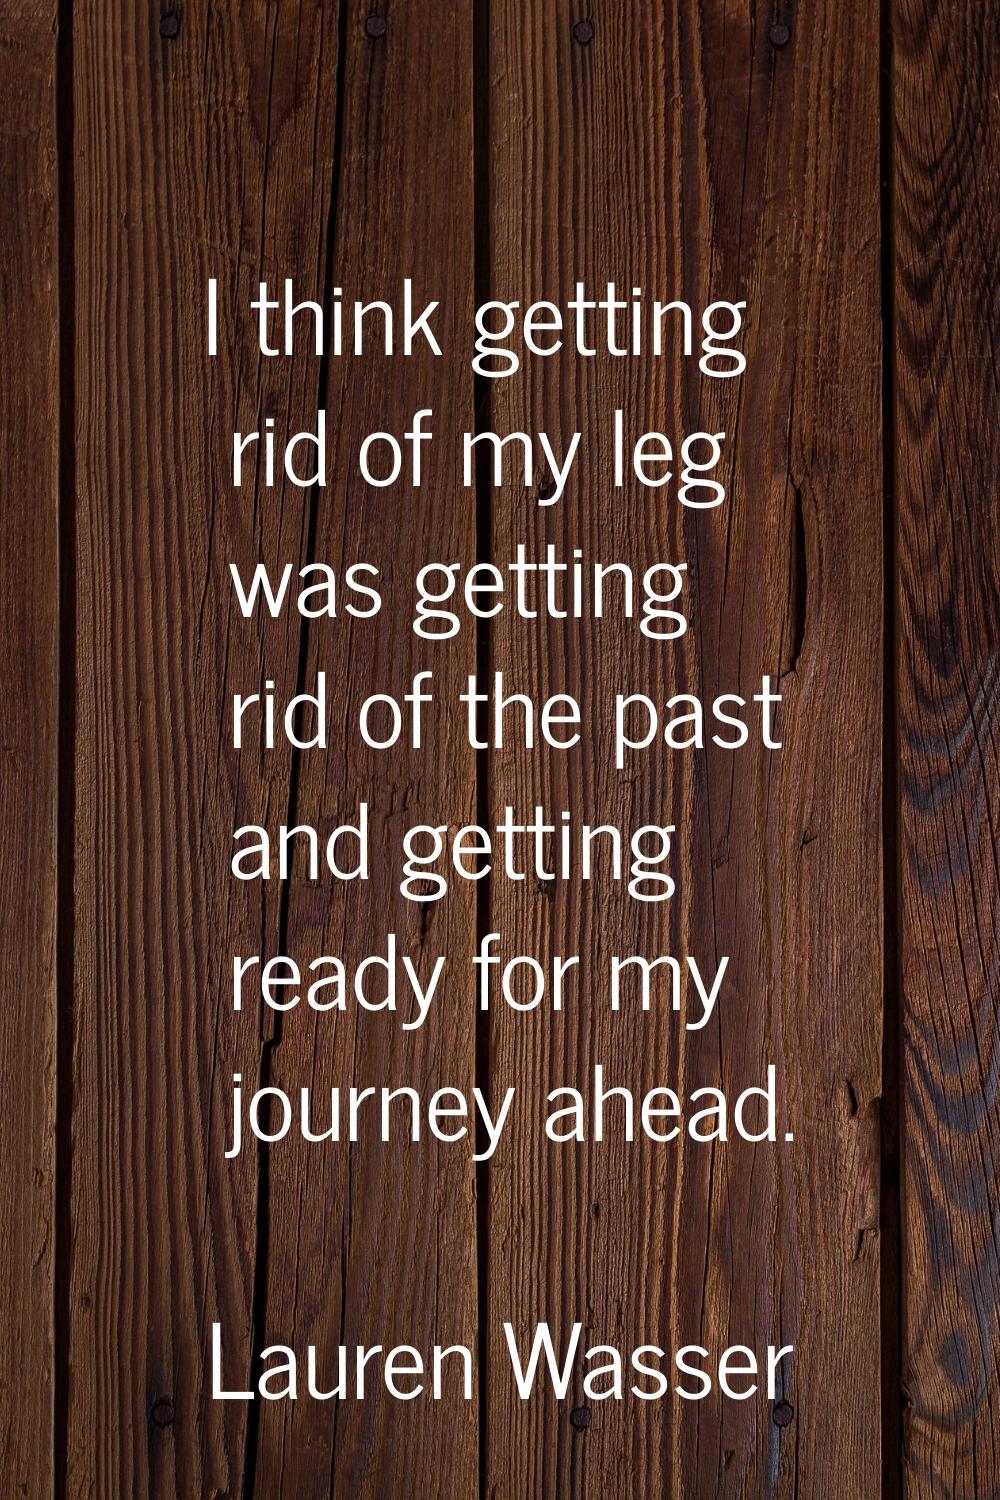 I think getting rid of my leg was getting rid of the past and getting ready for my journey ahead.